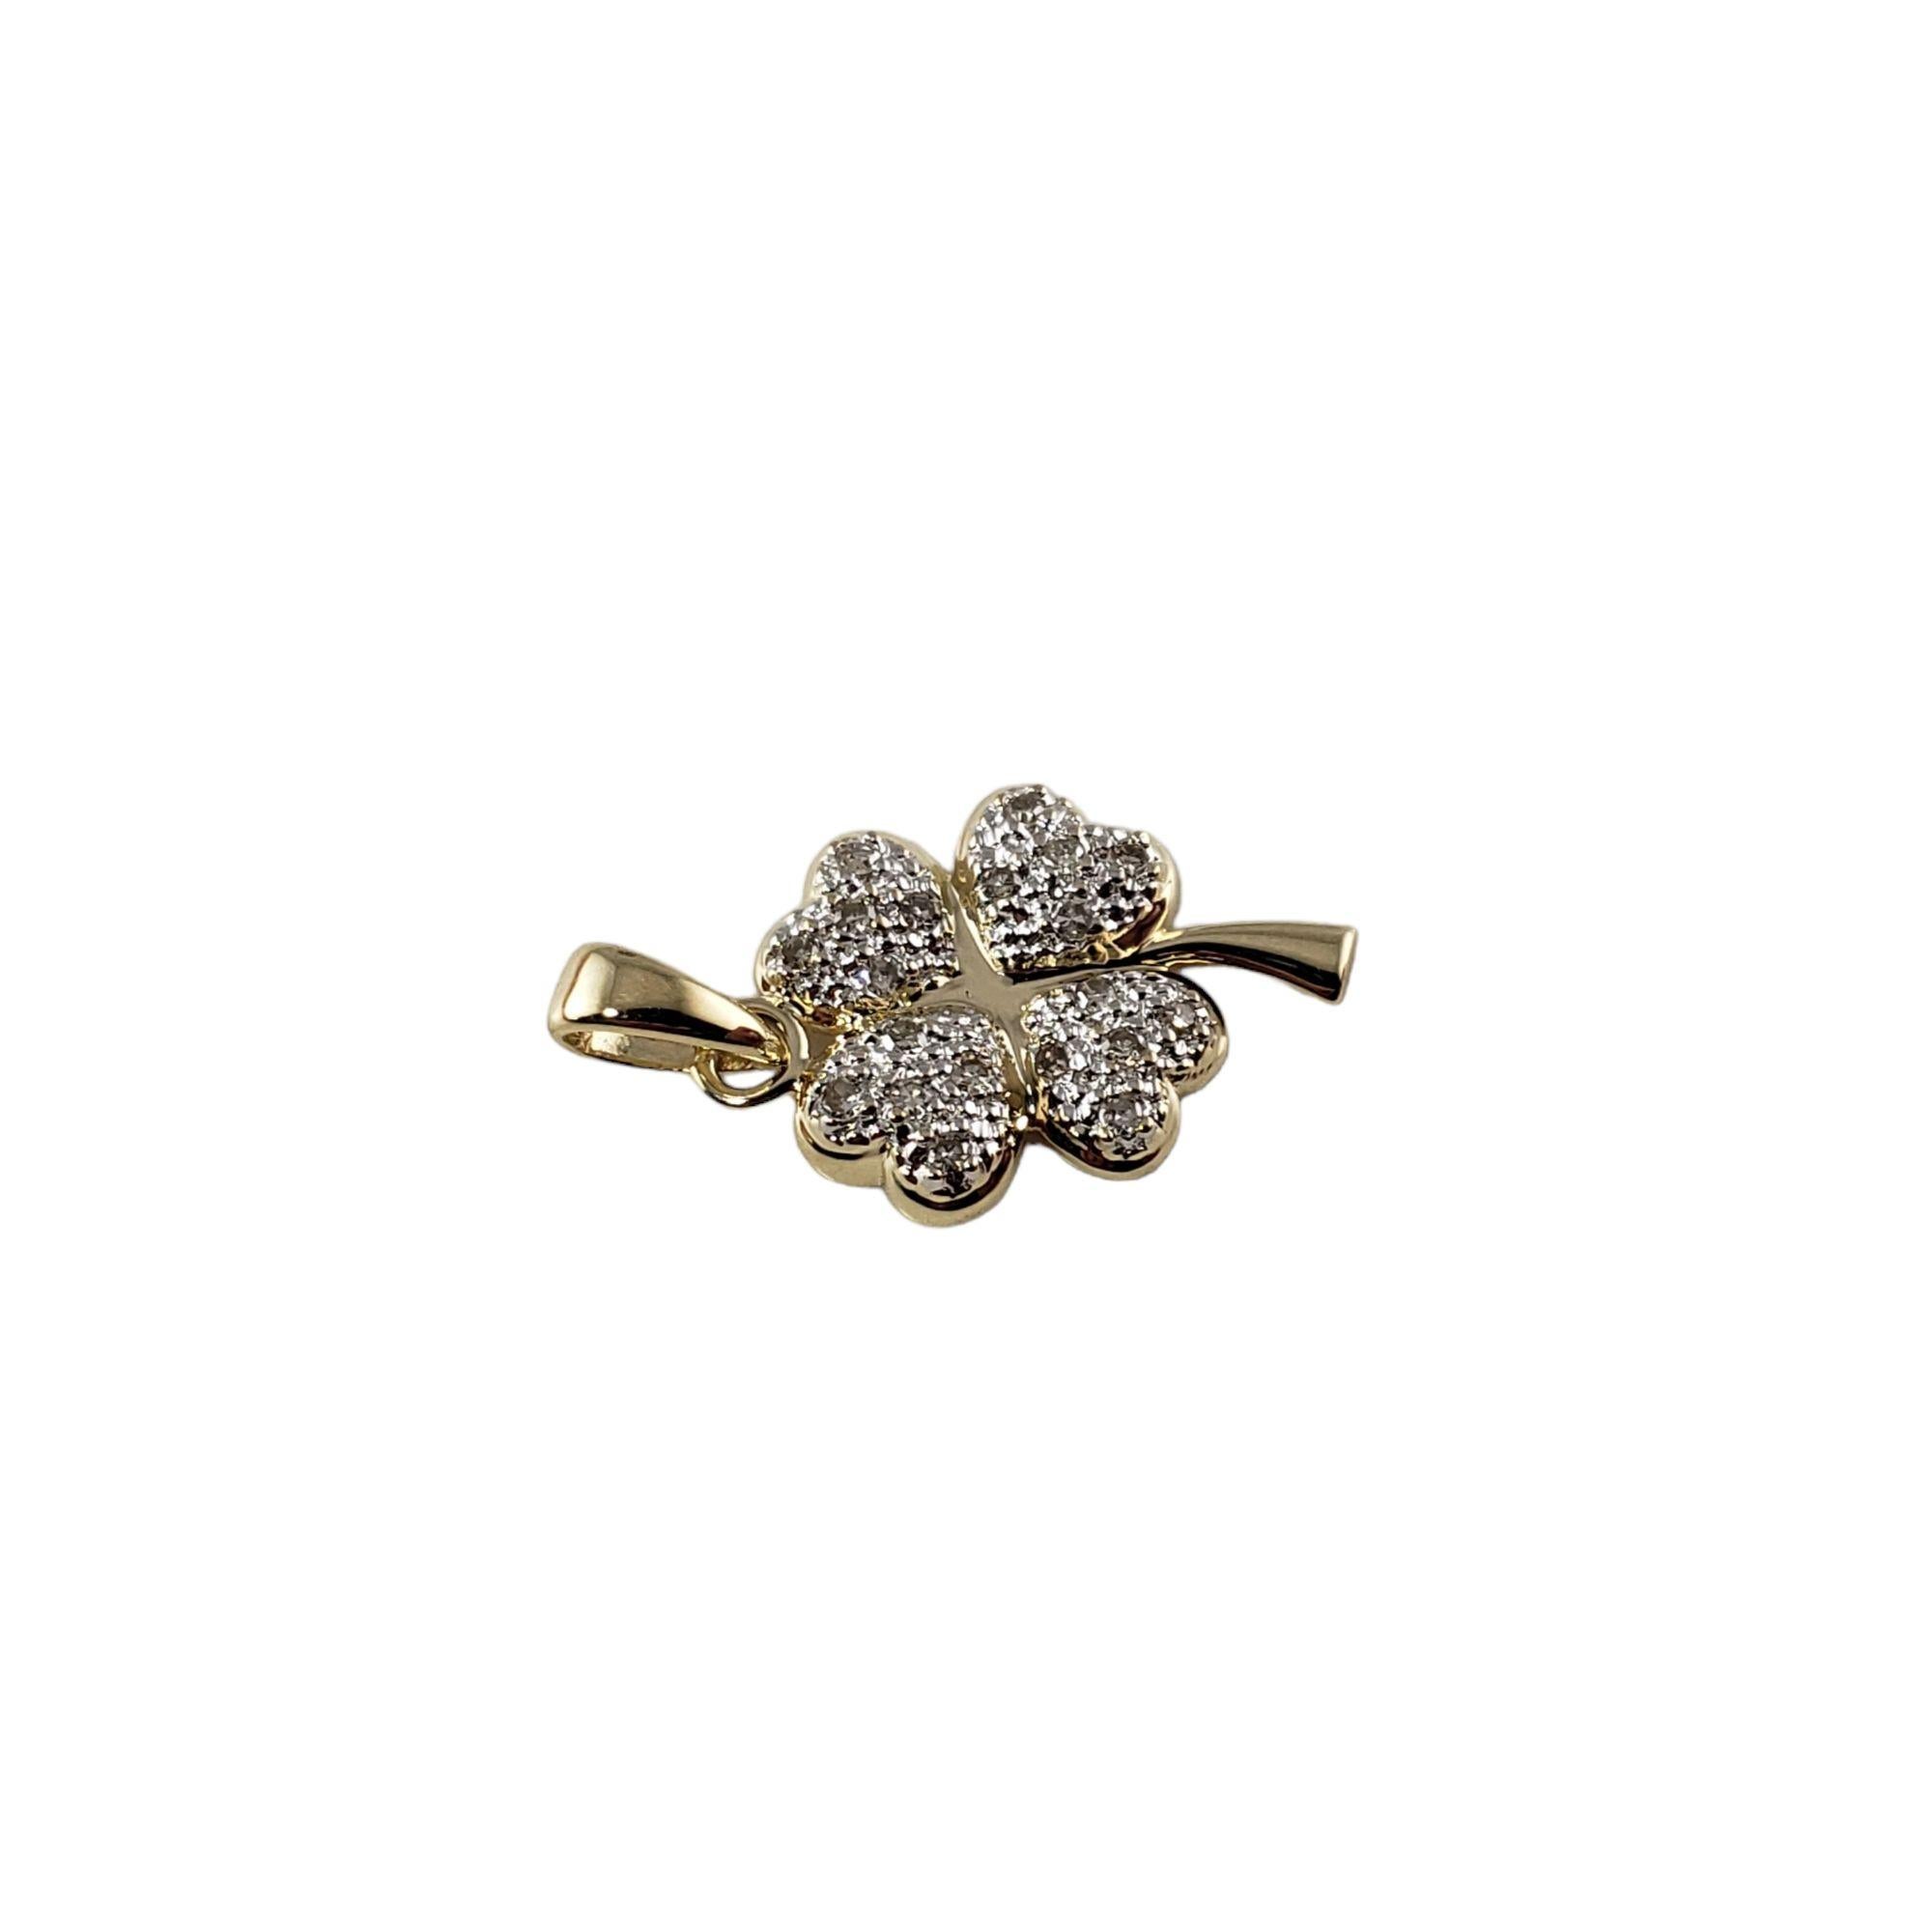 Vintage 14 Karat Yellow Gold and Diamond Four Leaf Clover Charm-

The ultimate good luck charm!

This sparkling four leaf clover charm features 20 round single cut diamonds set in classic 14K yellow gold.

Approximate total diamond weight: .10